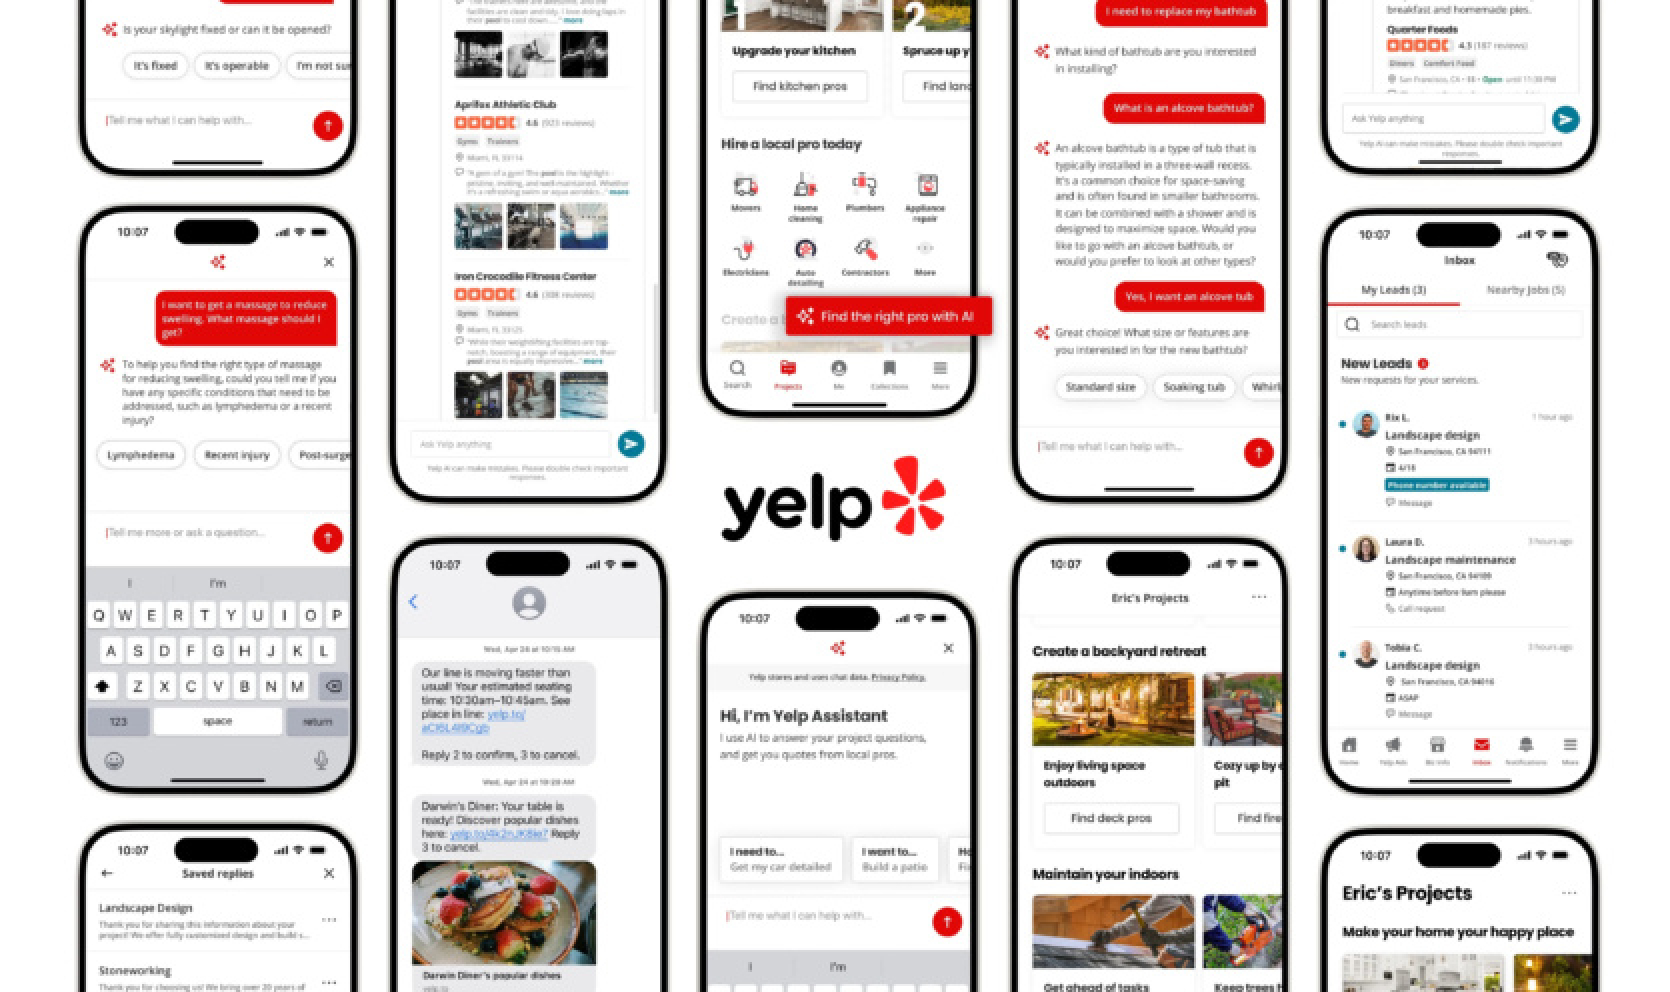 Yelp launches artificial intelligence assistant to help you communicate with companies